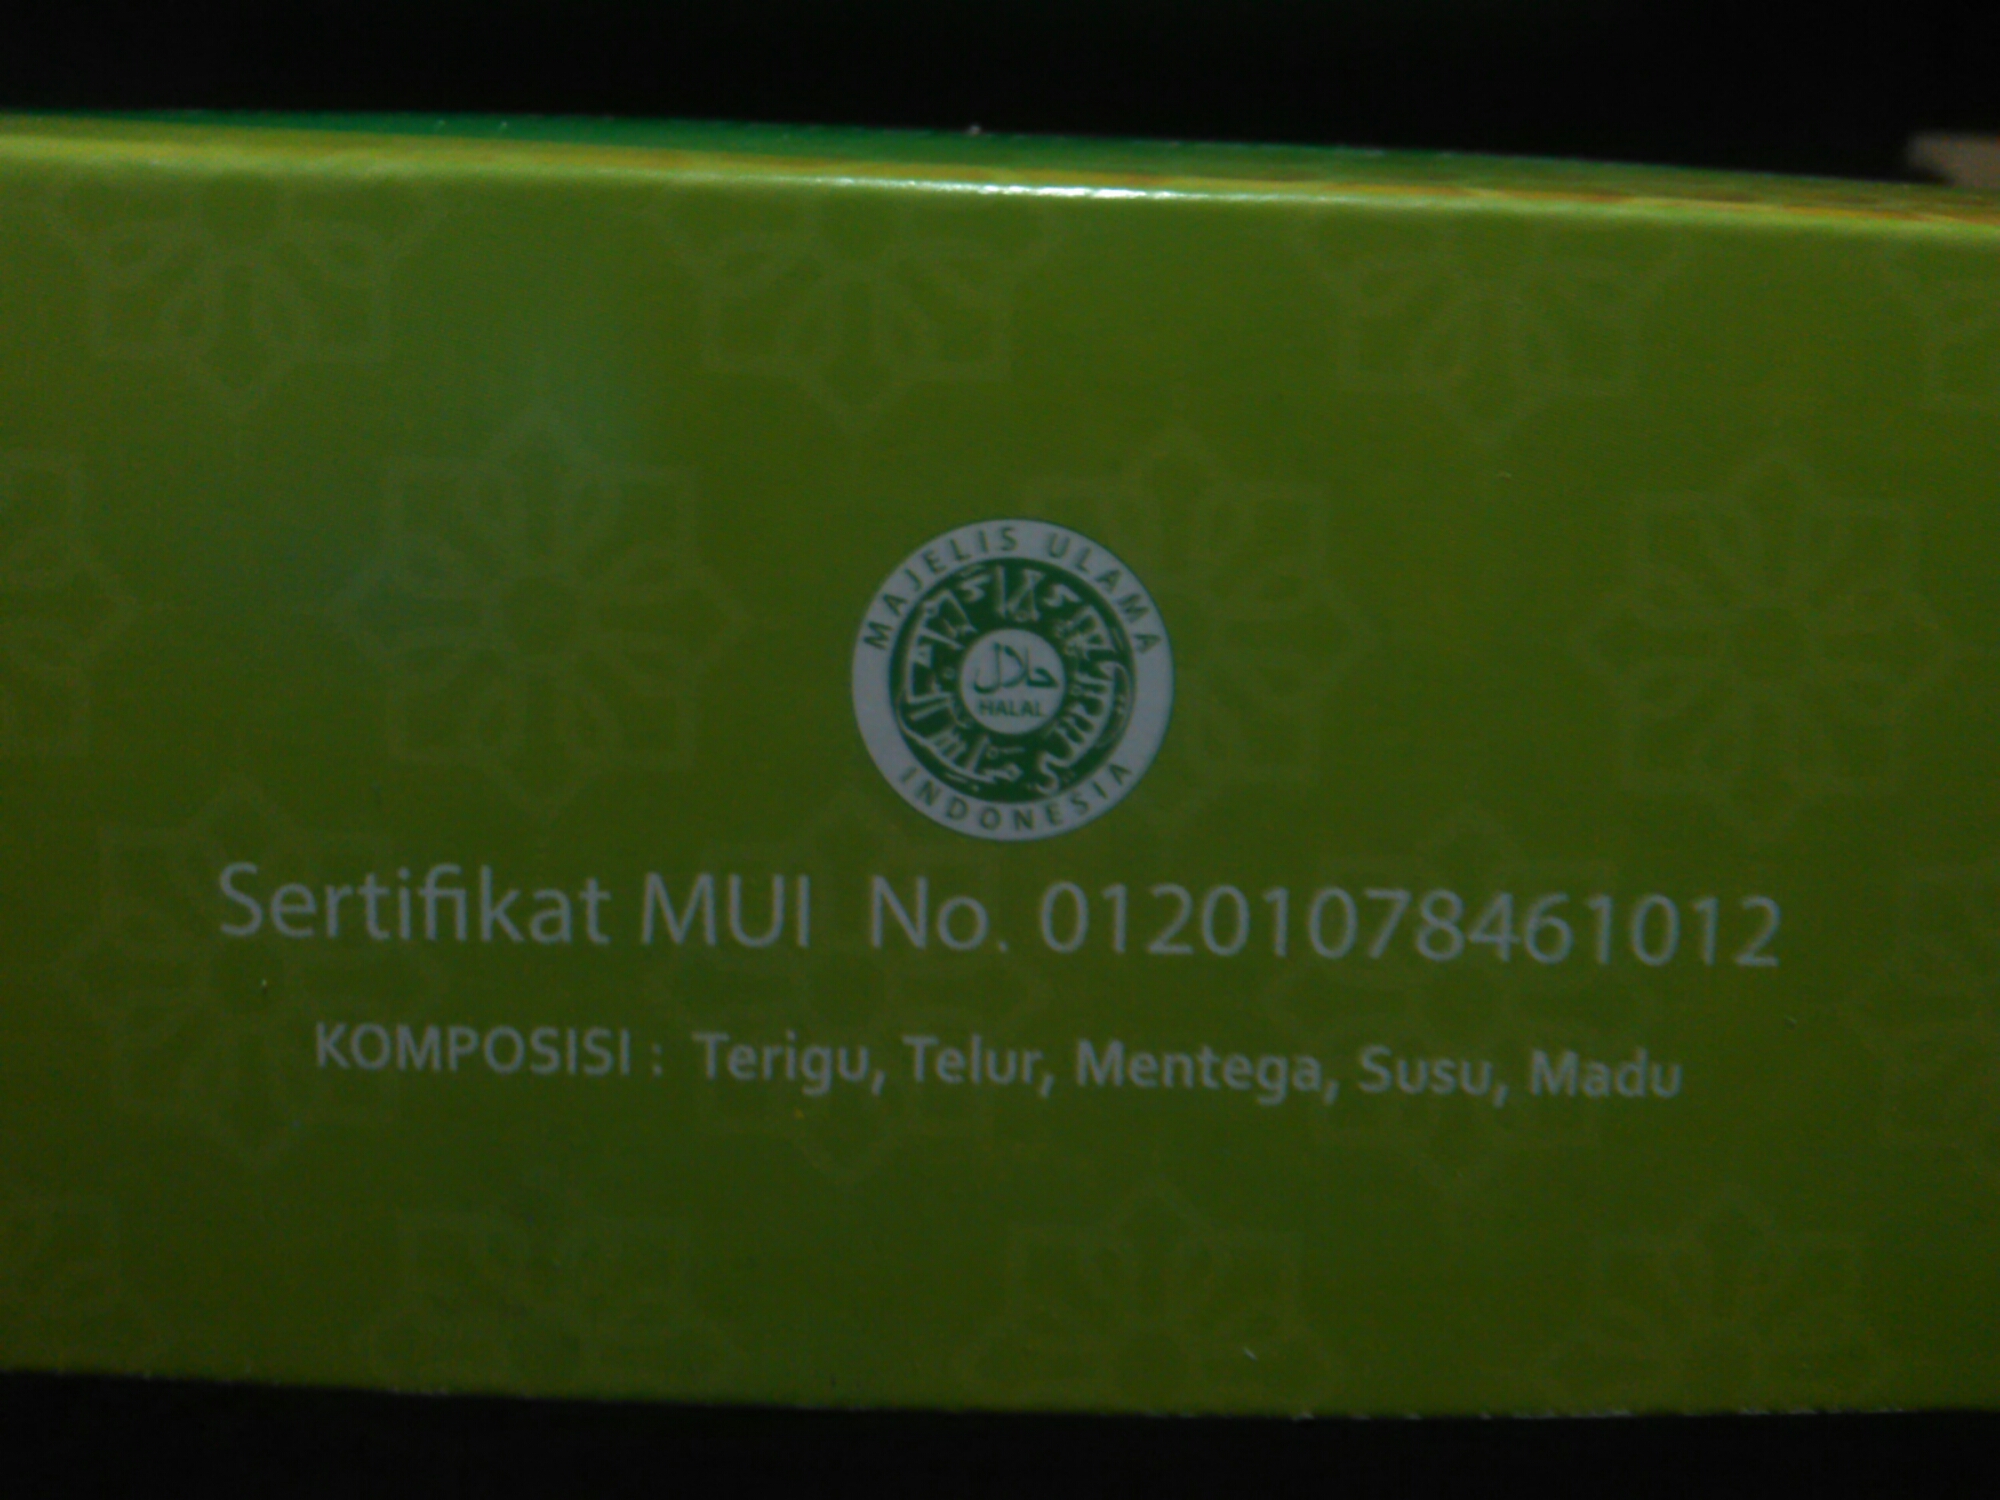 REVIEW DONAT MADU, HALAL DAN SEHAT  my daily product review